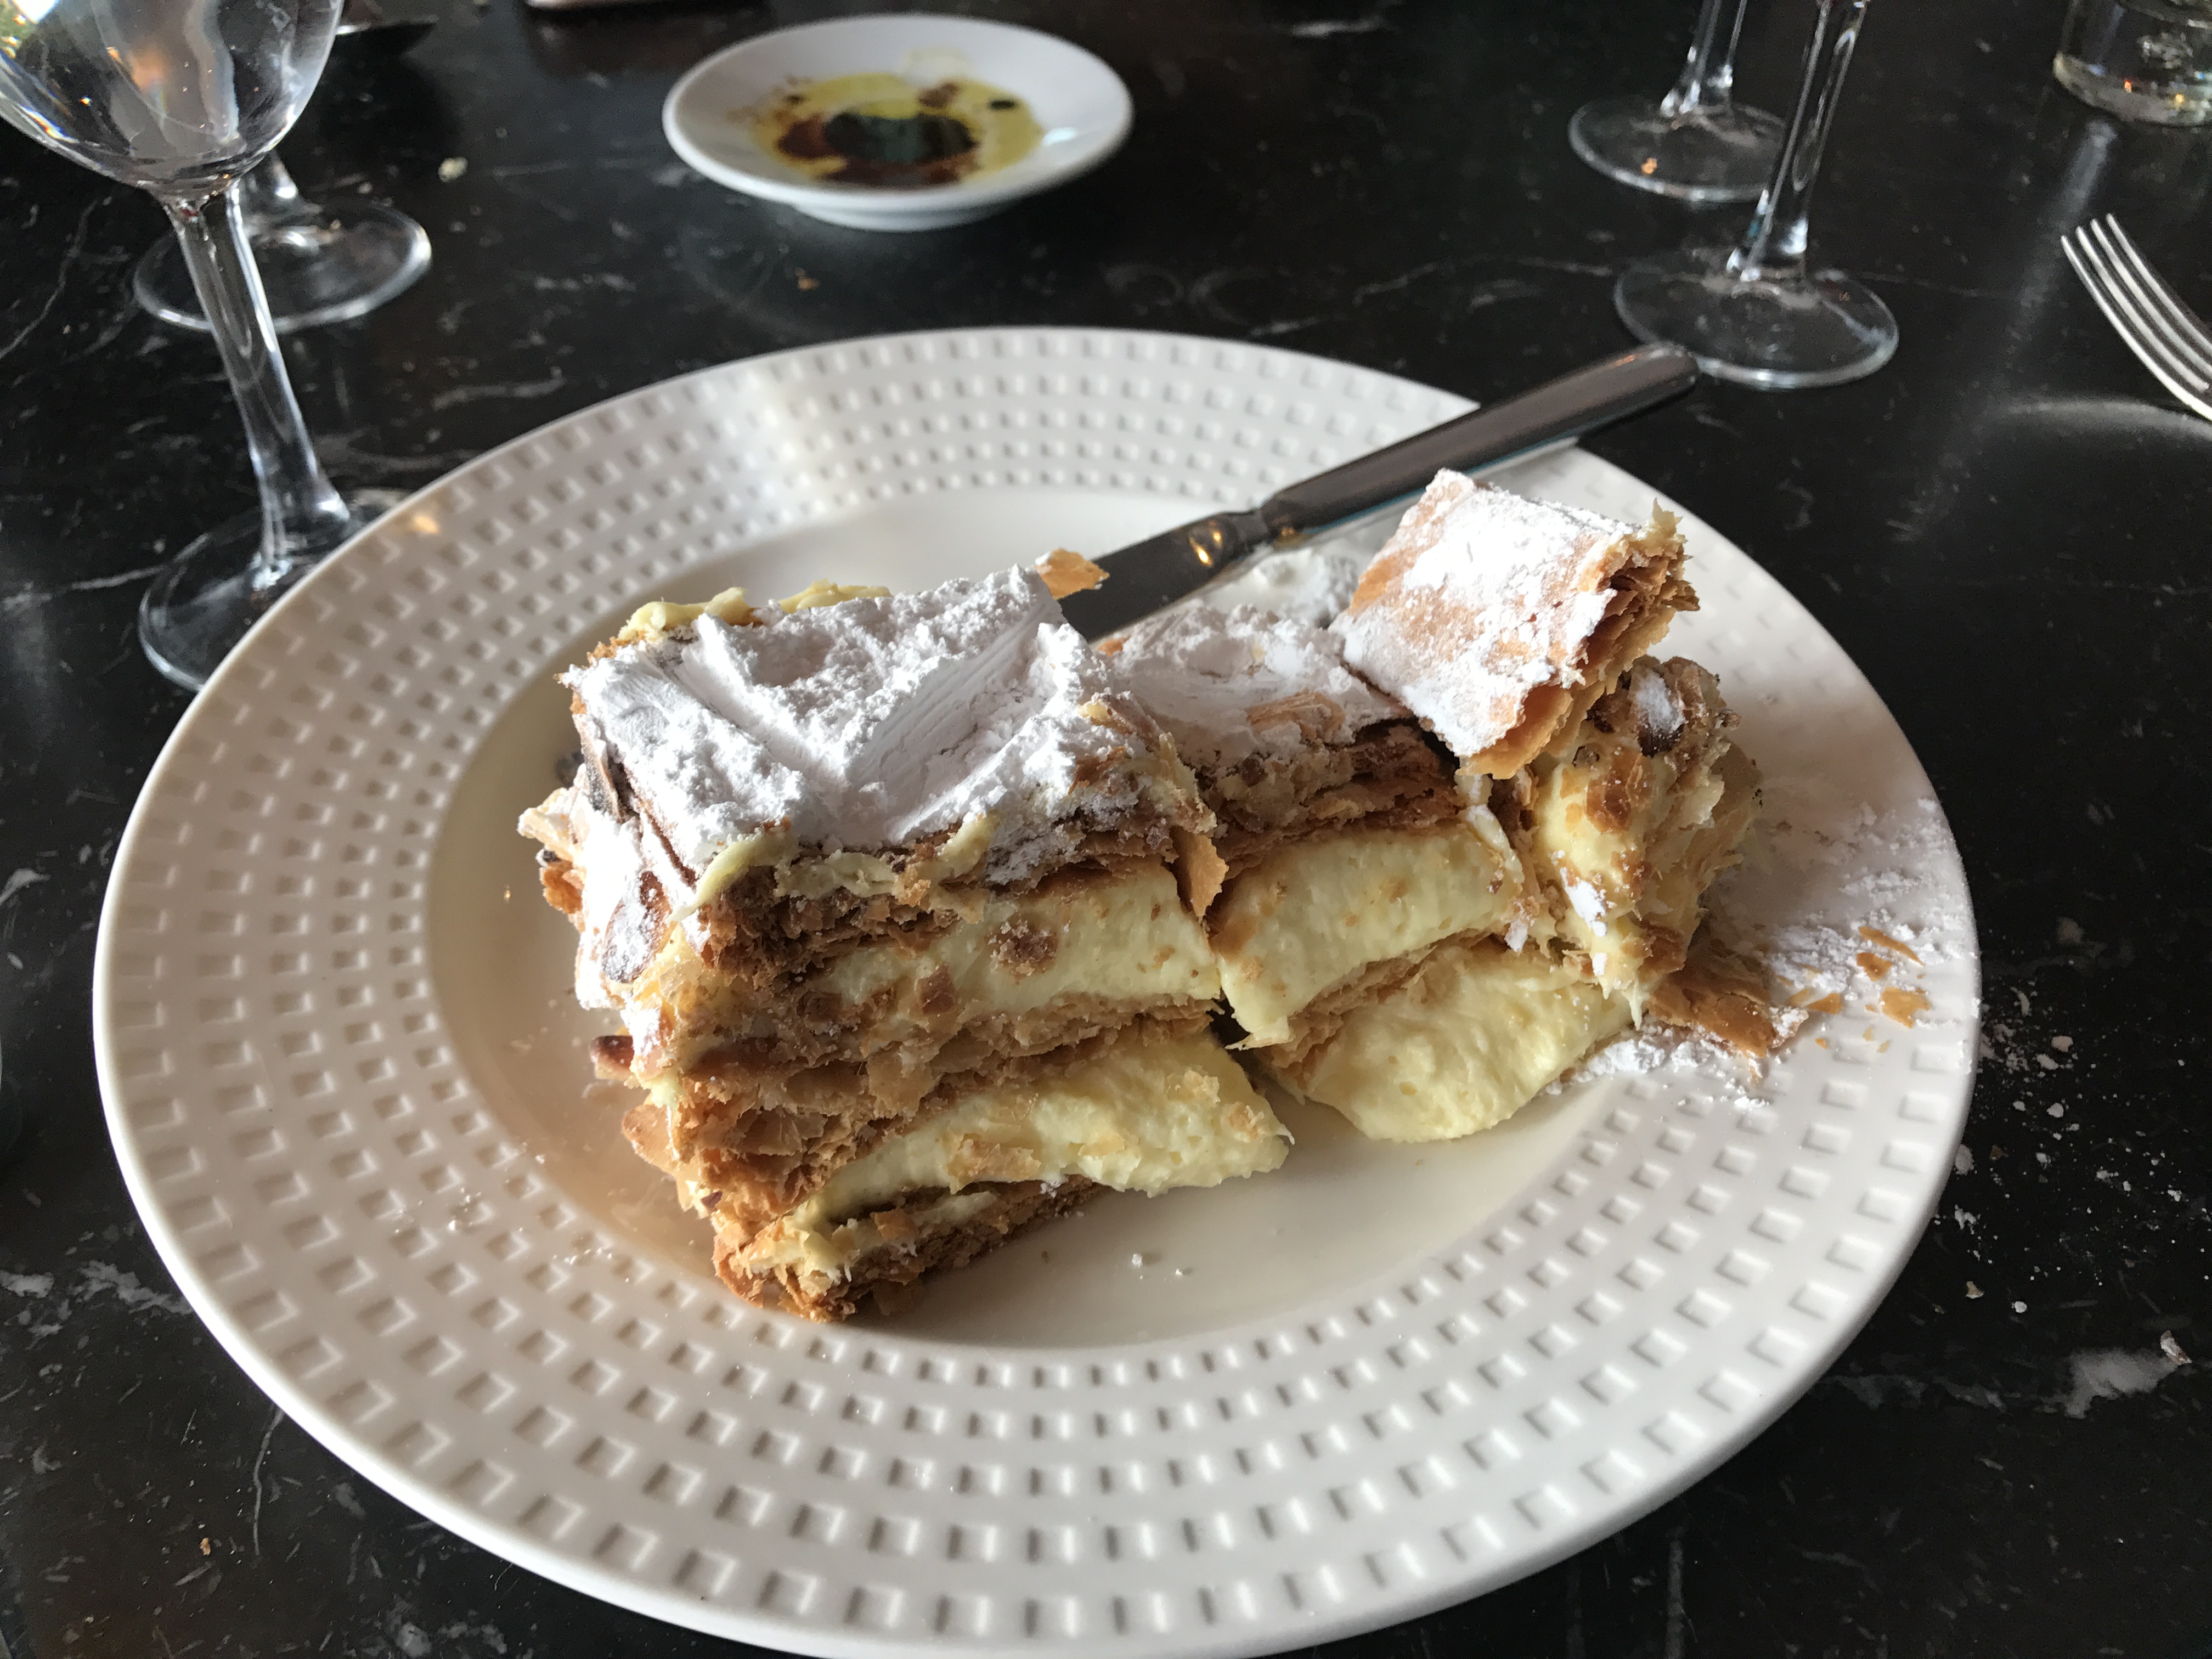 French Vanilla Slices (Mille-feuilles)